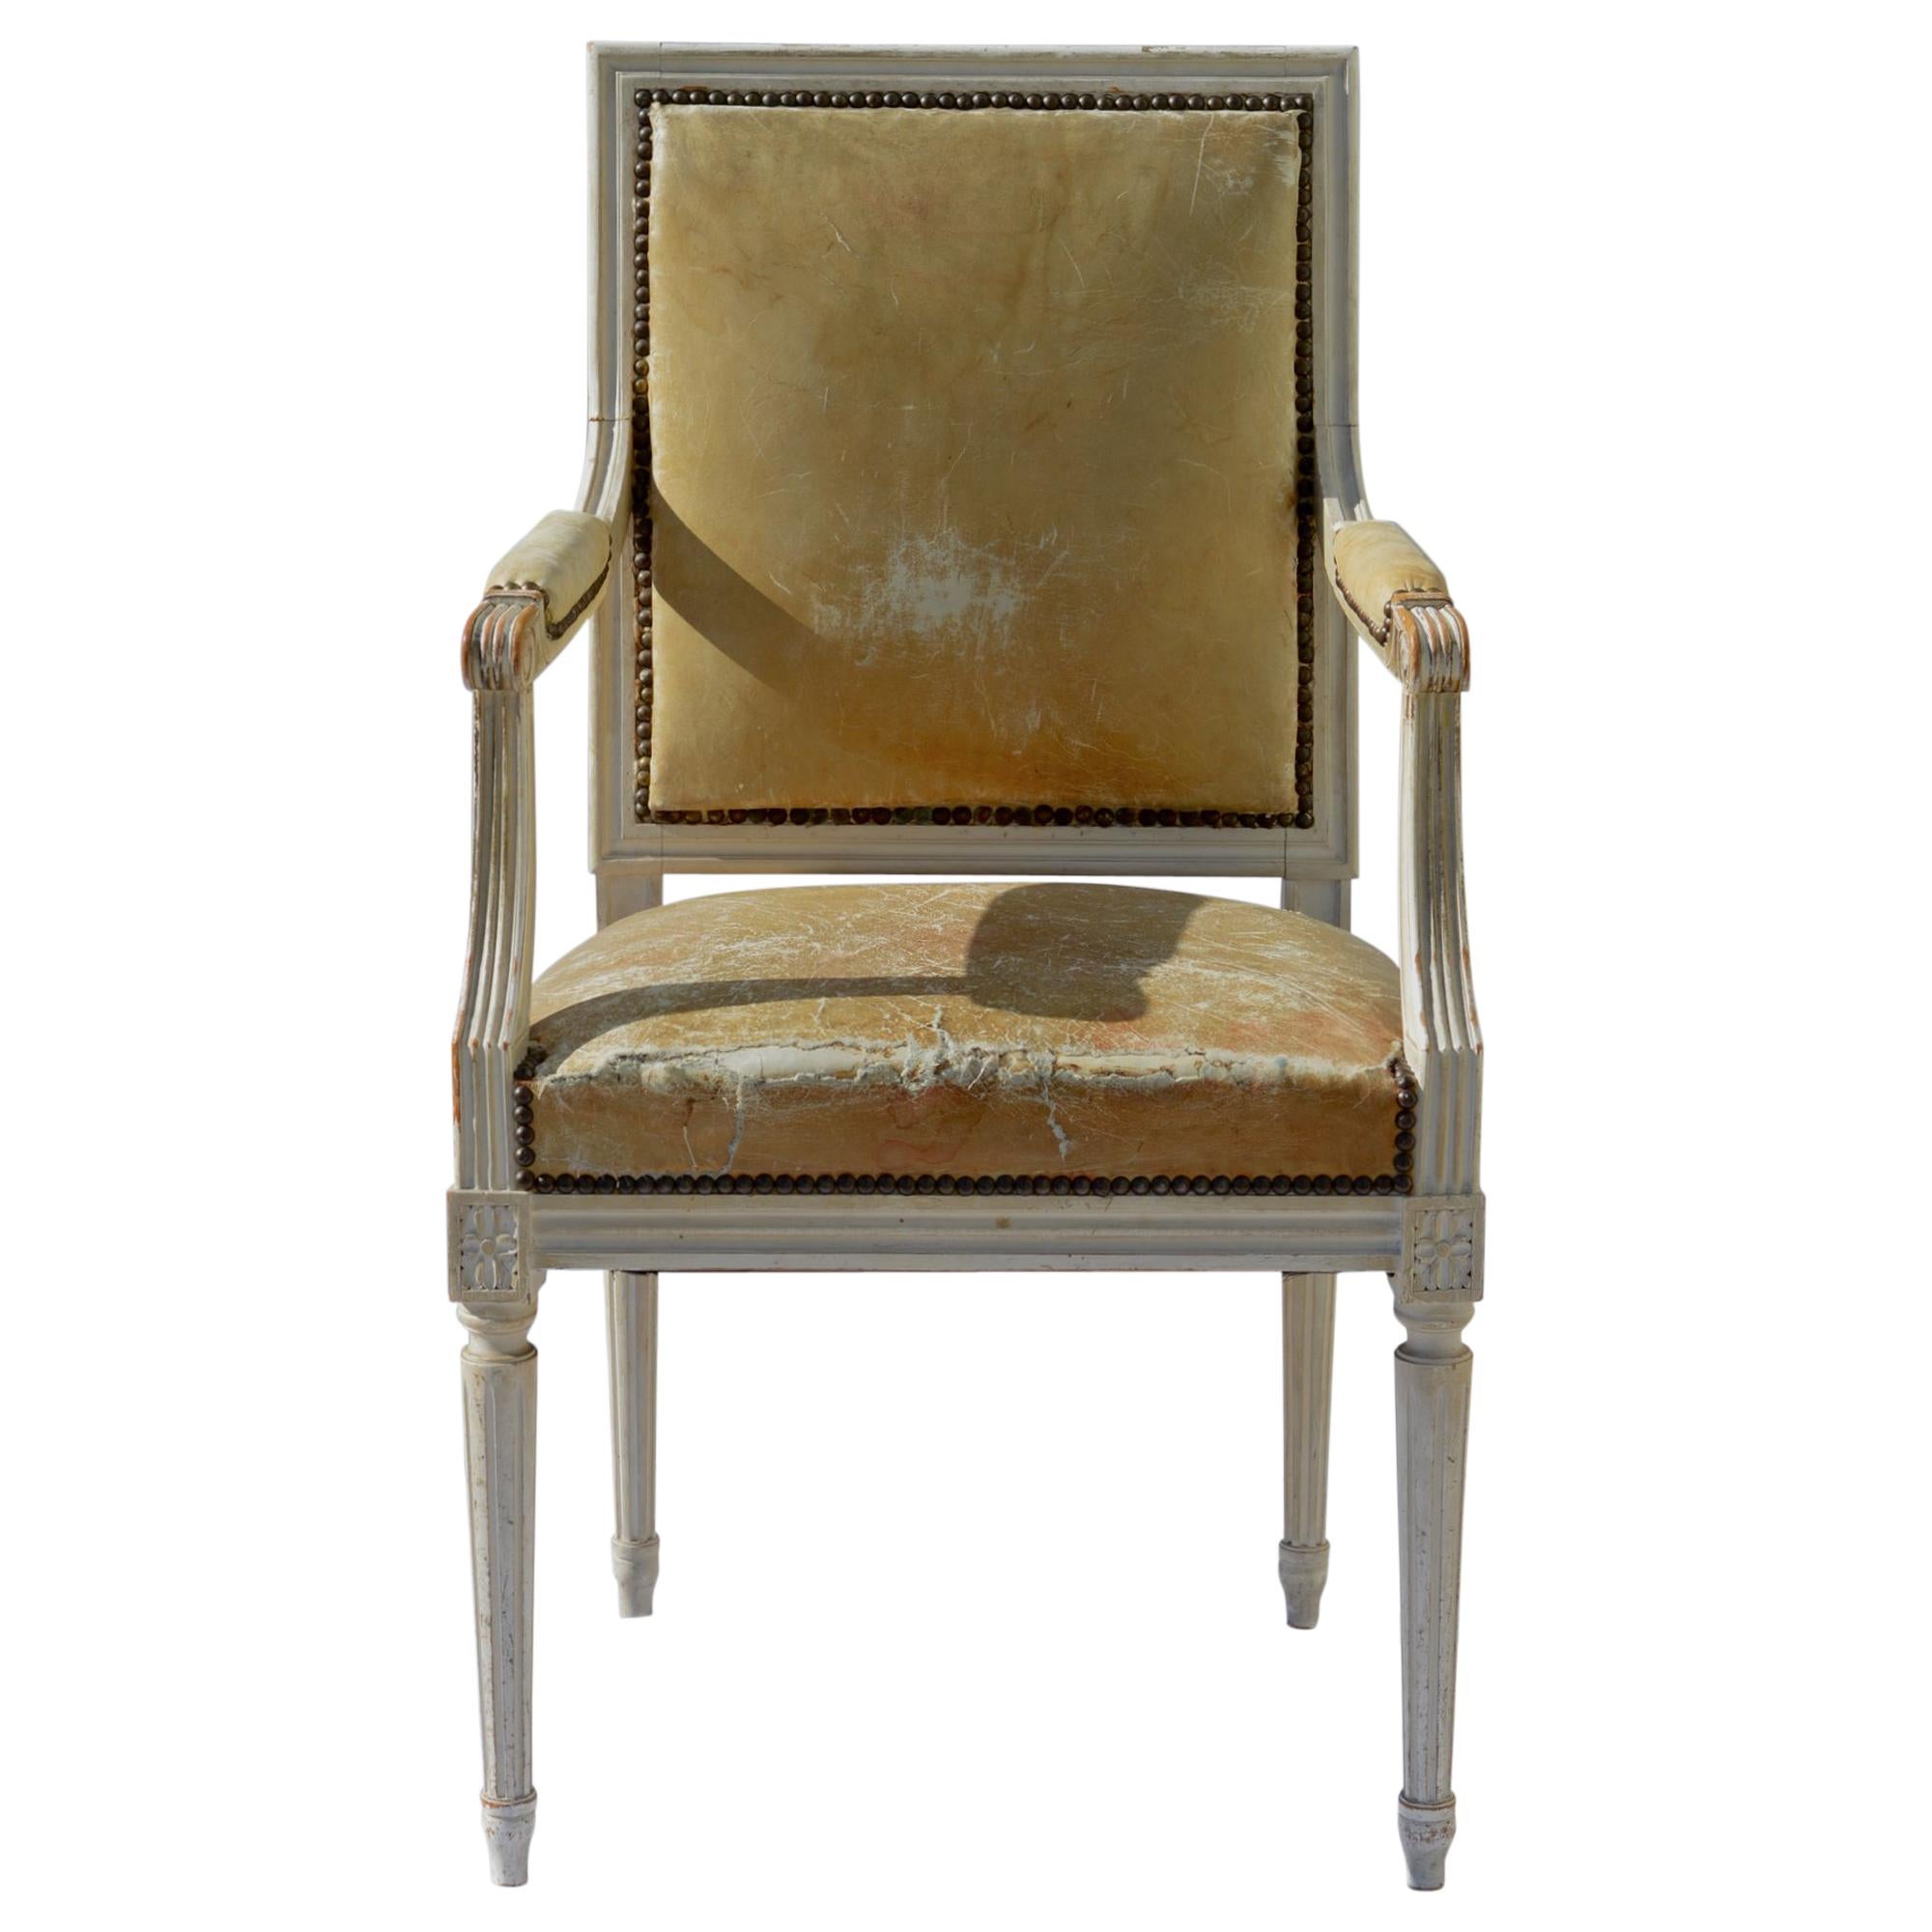 Painted French Louis XVI Style Desk Chair in Old Leather